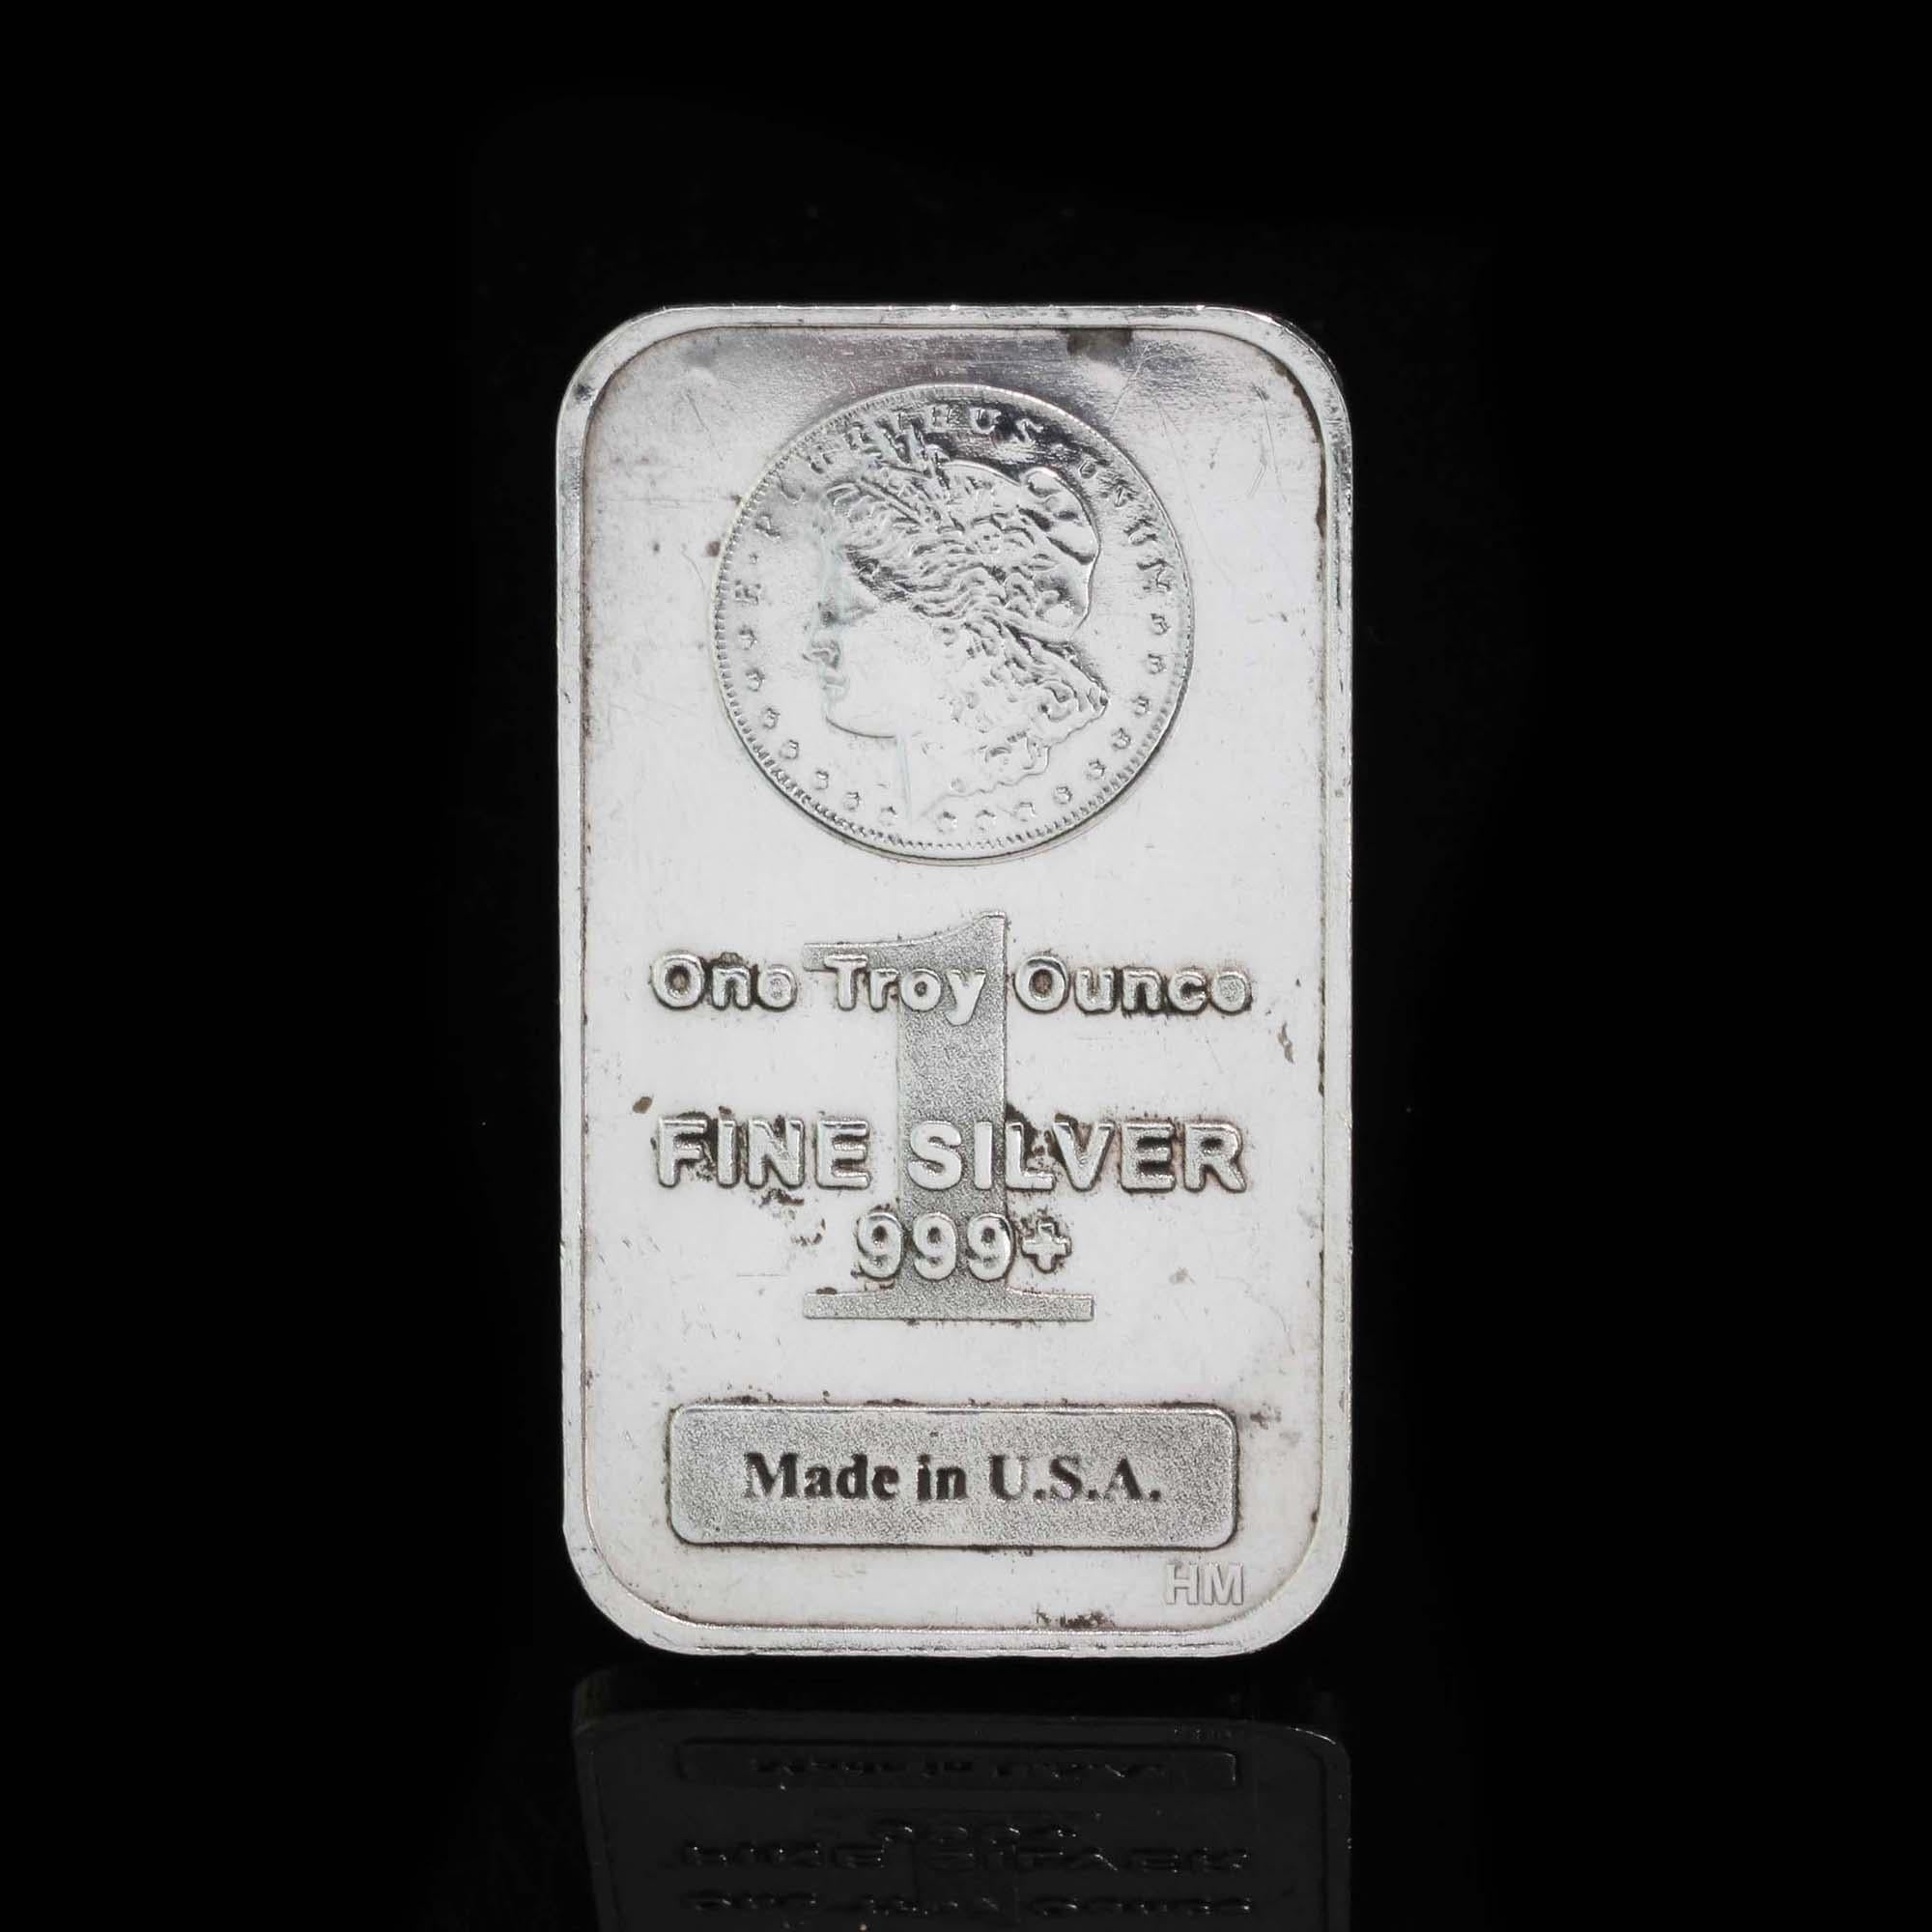 One Troy Ounce of fine silver 999+ 

The bar is stamped with the proud inscription Made in U.S.A. 
Morgan silver dollar right on the bar.
This lady of liberty profile within the dollar is offset by the silver bars stamps that denote its .999